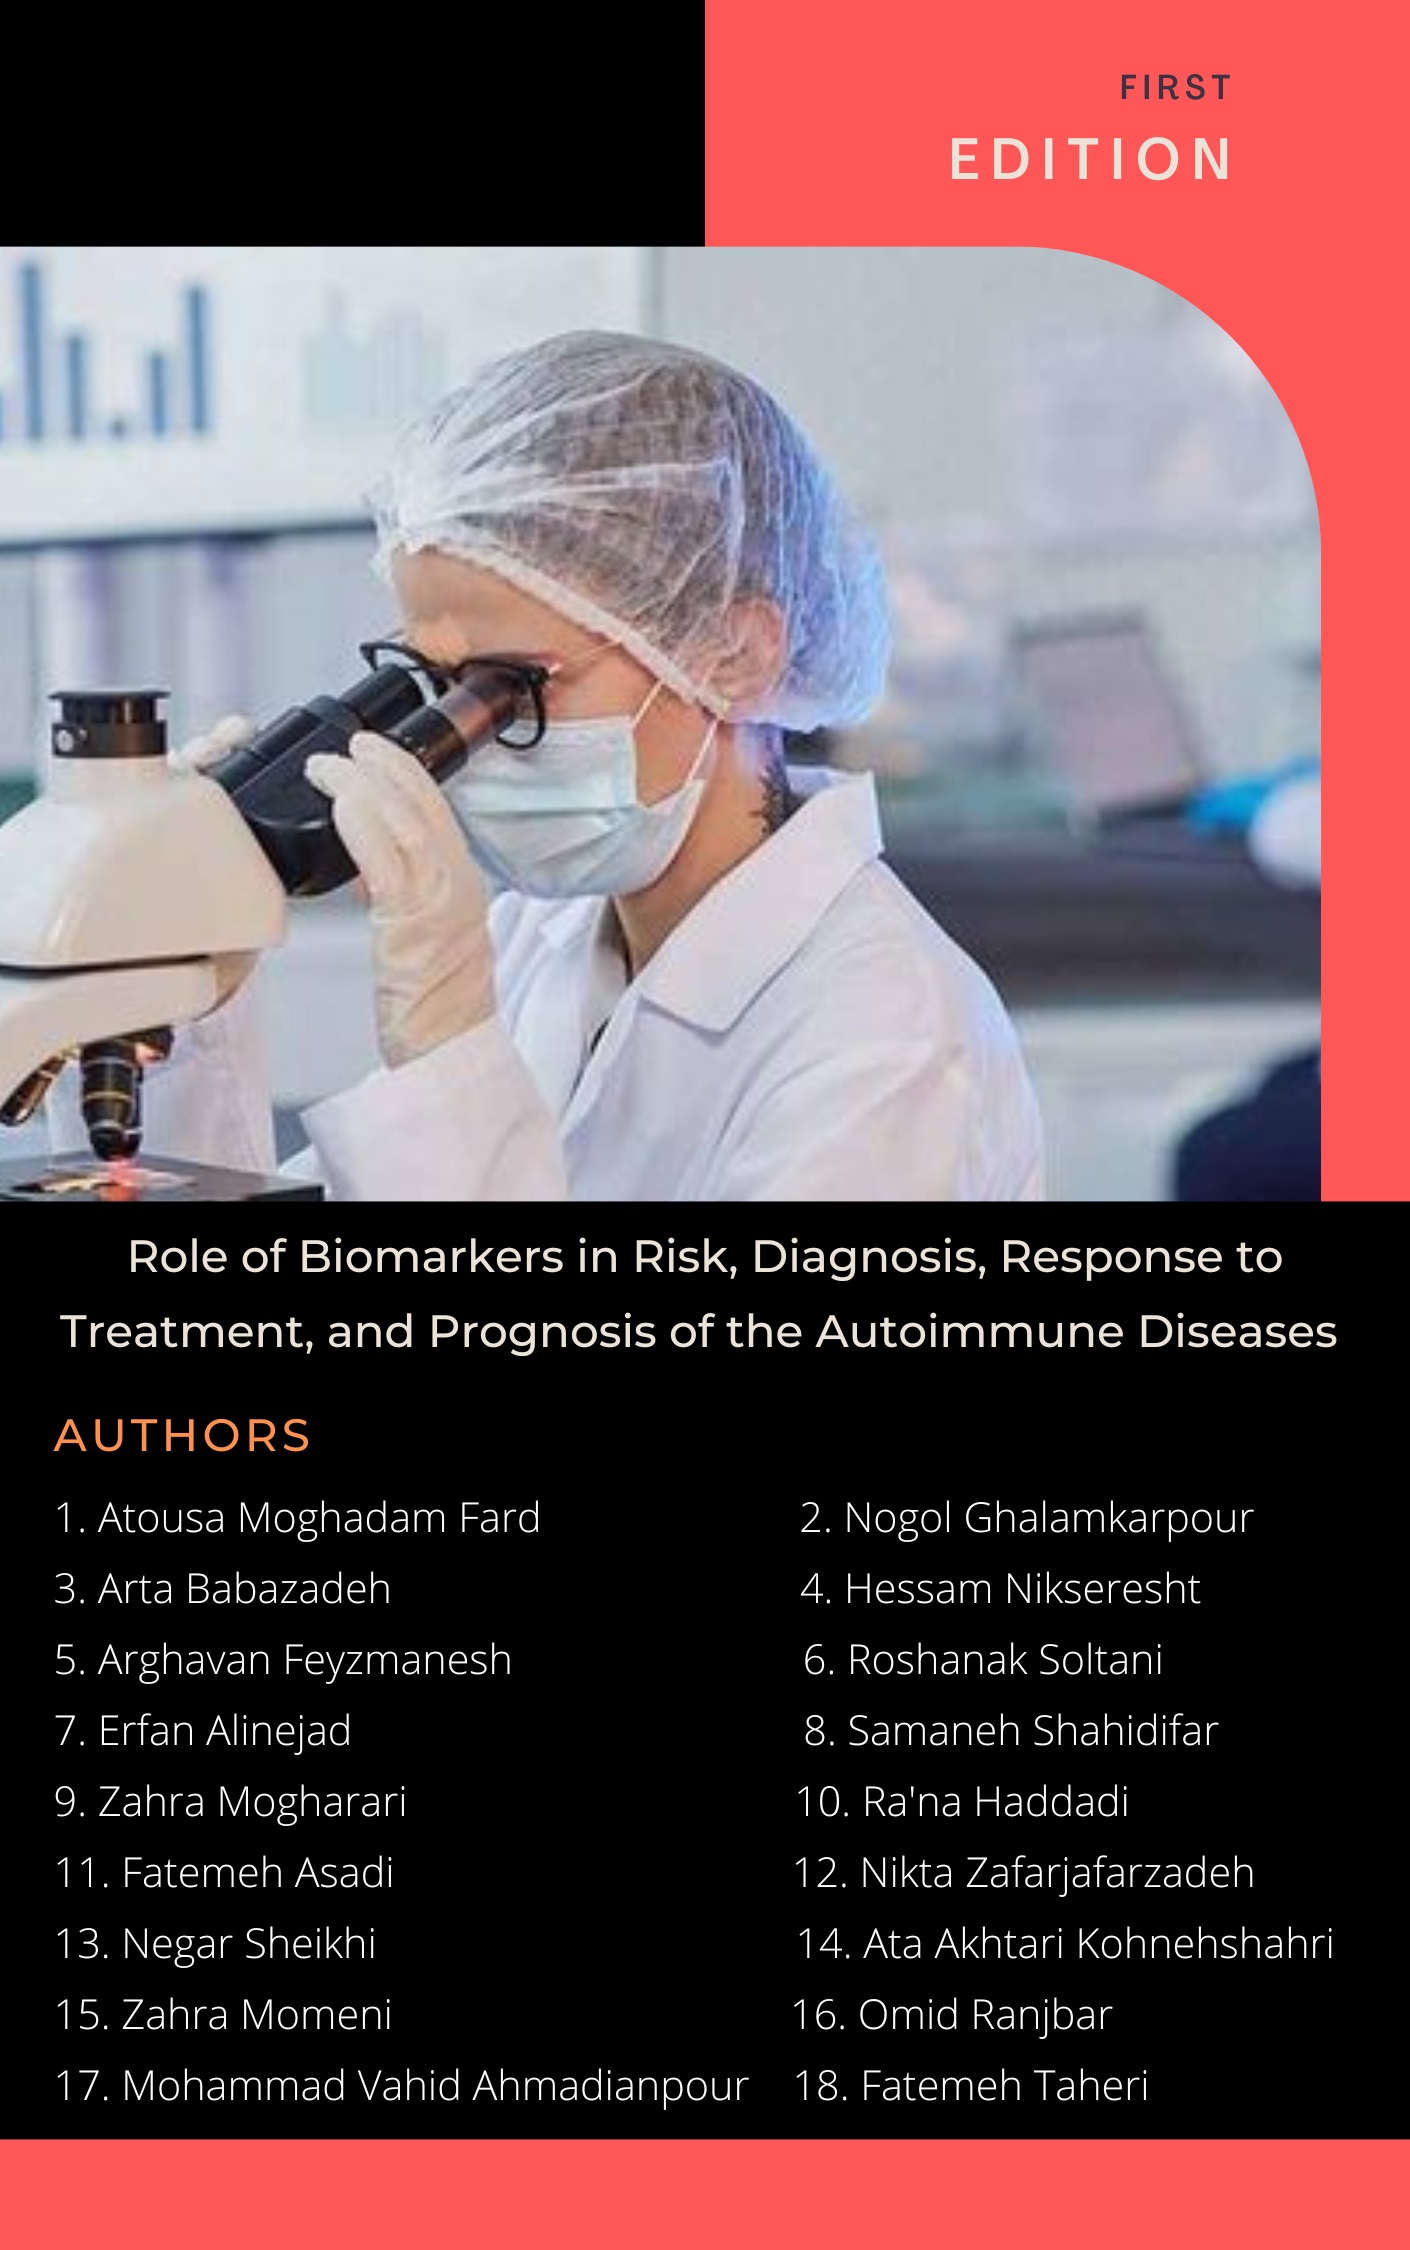 Role of Biomarkers in Risk, Diagnosis, Response to Treatment, and Prognosis of the Autoimmune Diseases